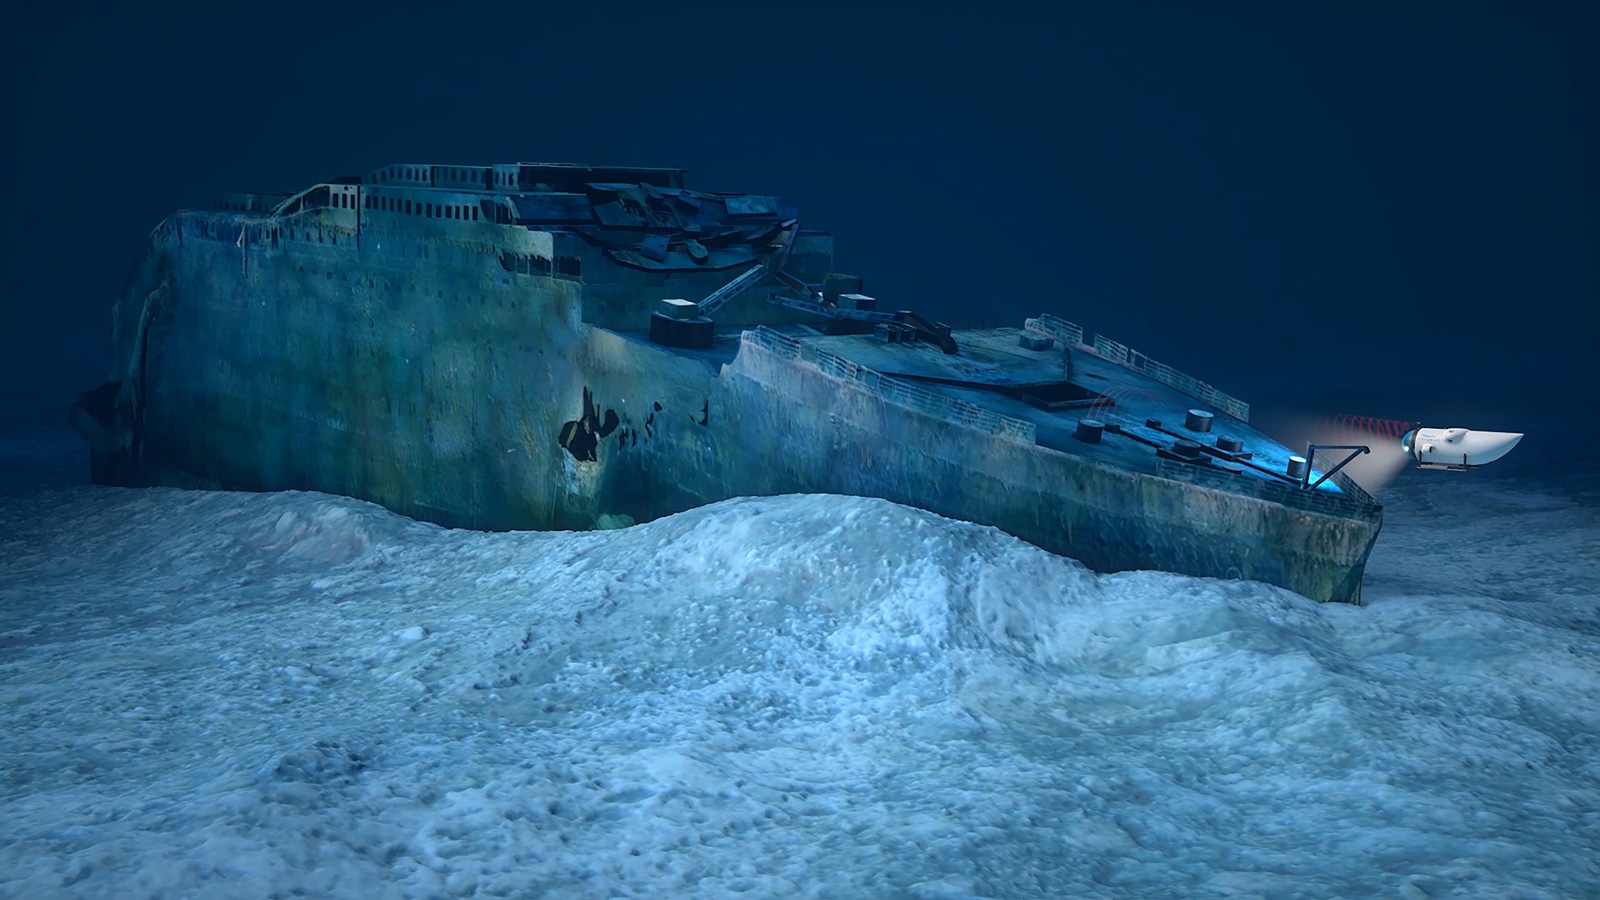 Diving Tours Of Titanic Wreck Site To Begin In 2019 Cnn Travel